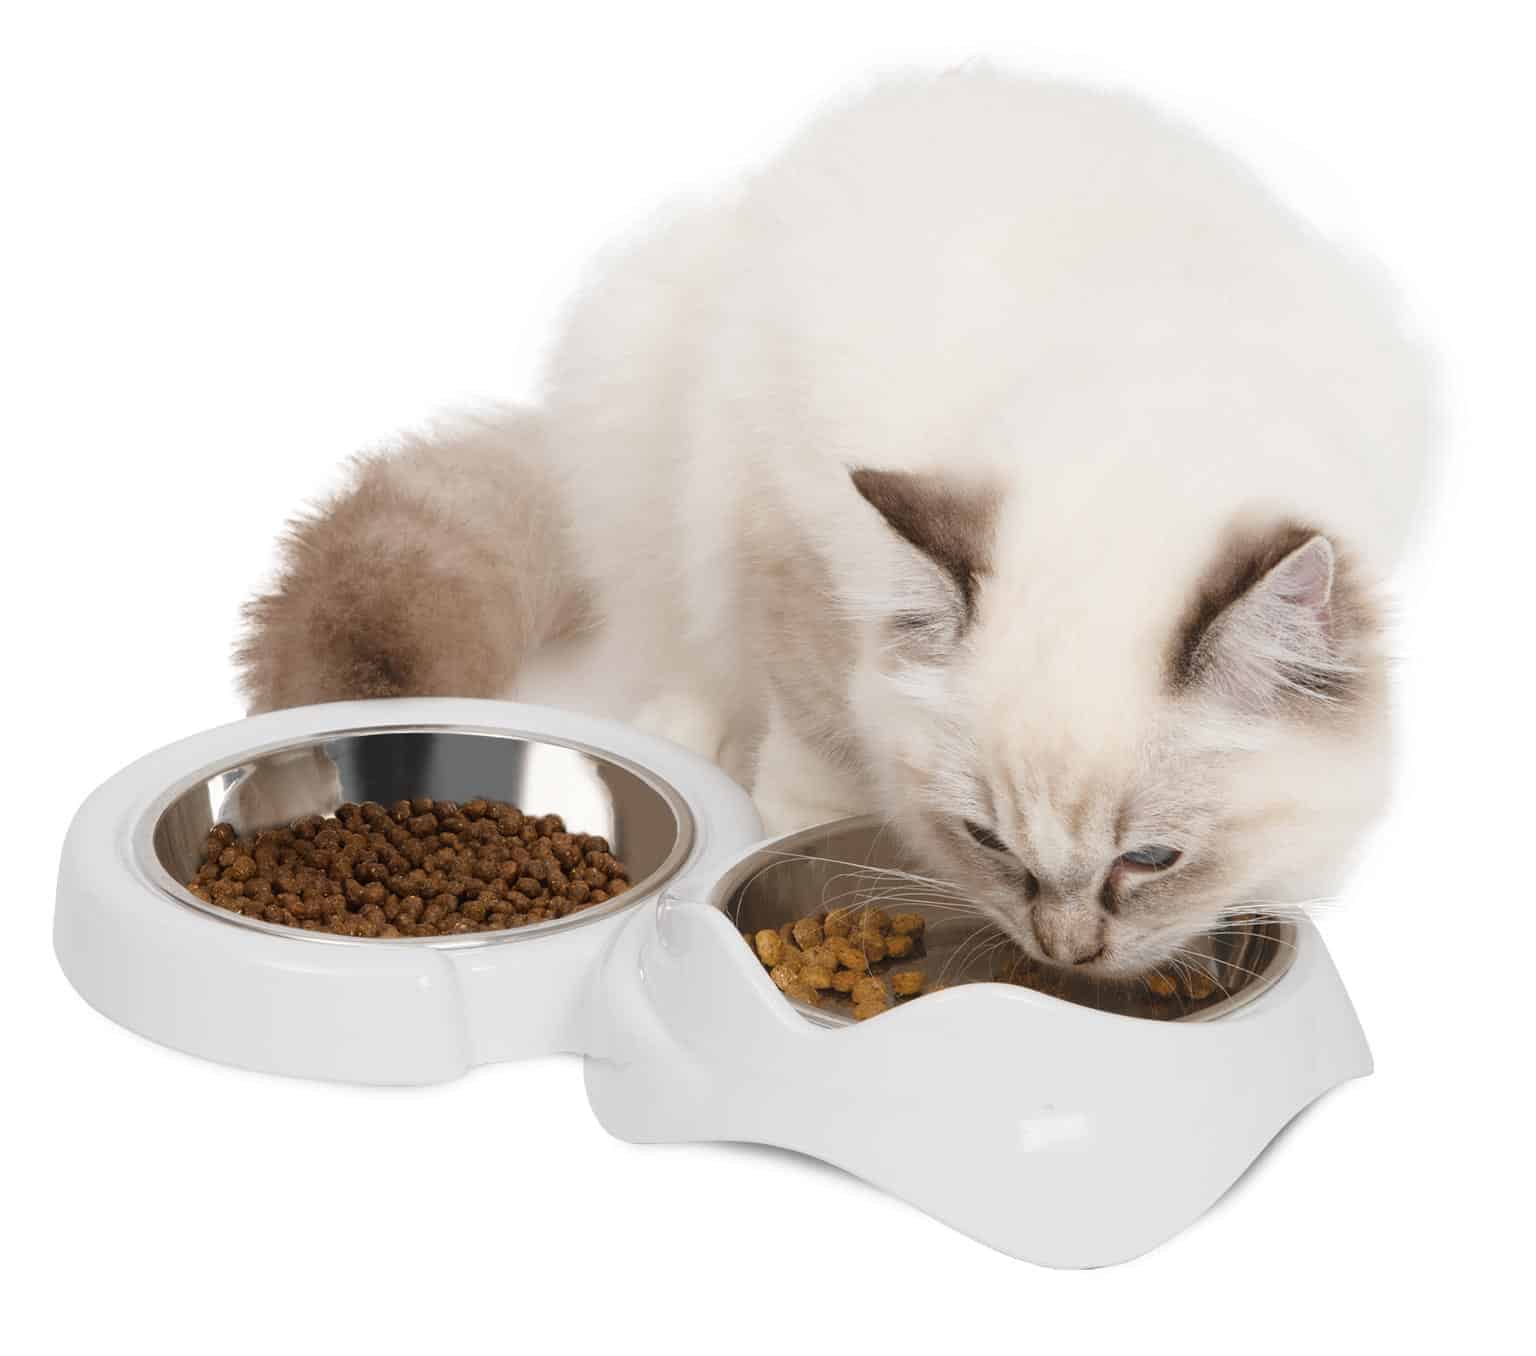 Cat eating from PIXI double feeding dish